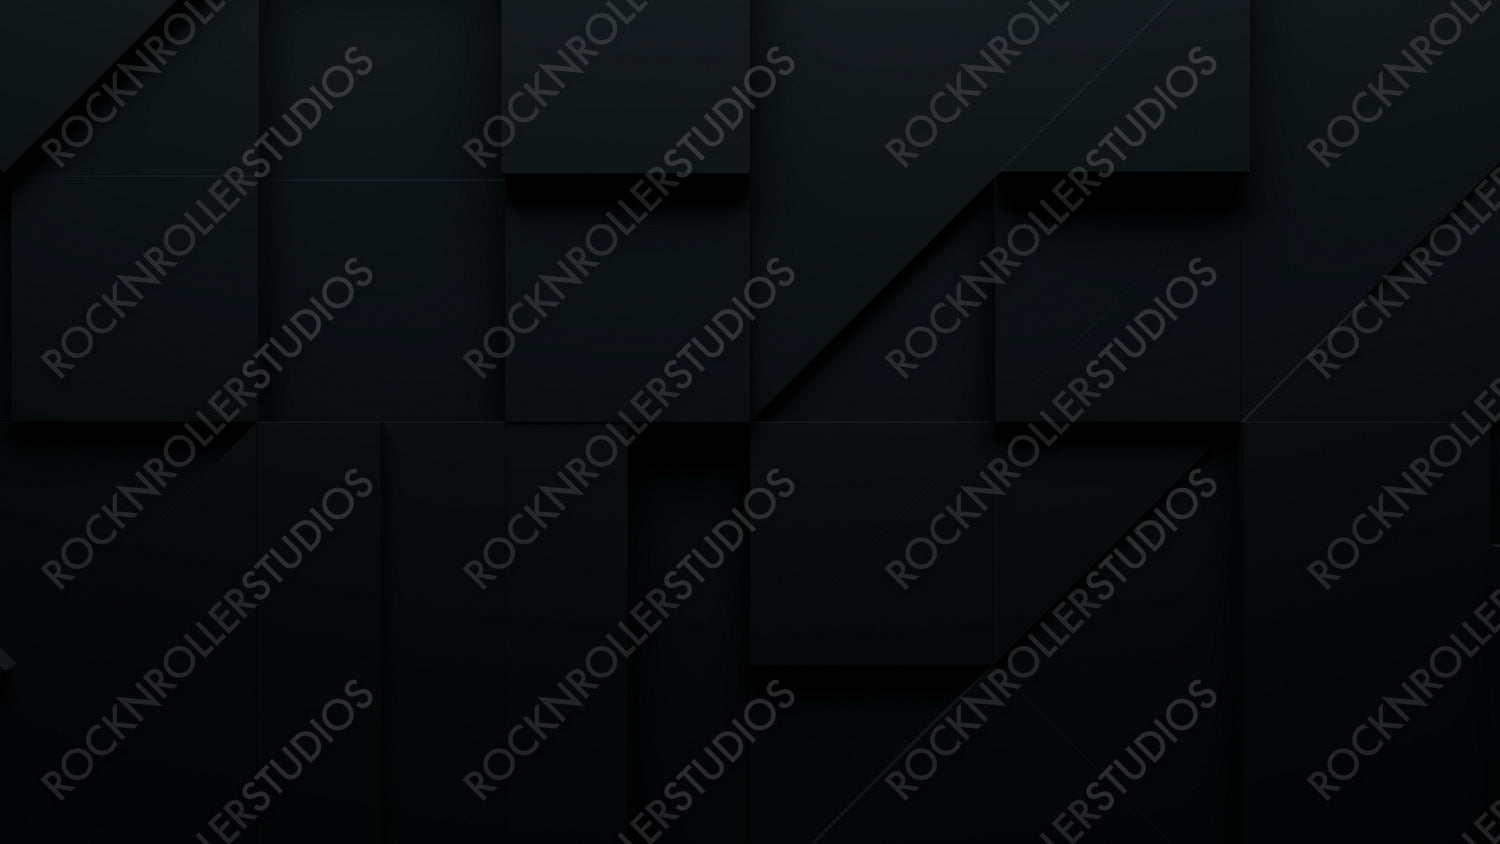 Abstract background made of Black 3D Blocks. Tech 3D Render .